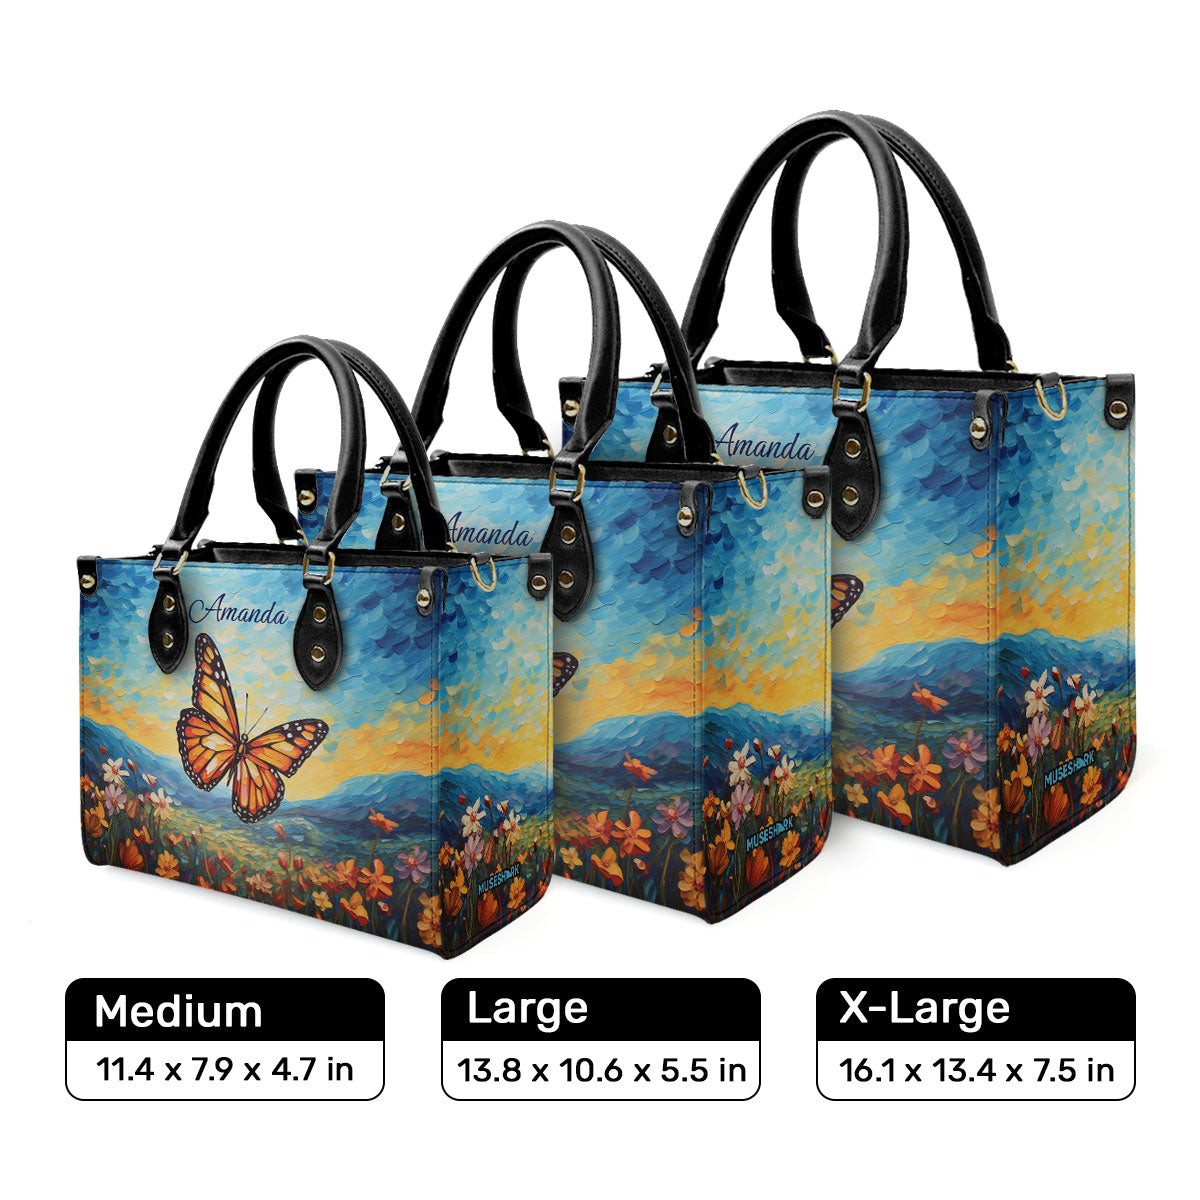 Butterfly In The Starry Night Style - Personalized Leather Handbag MSM07